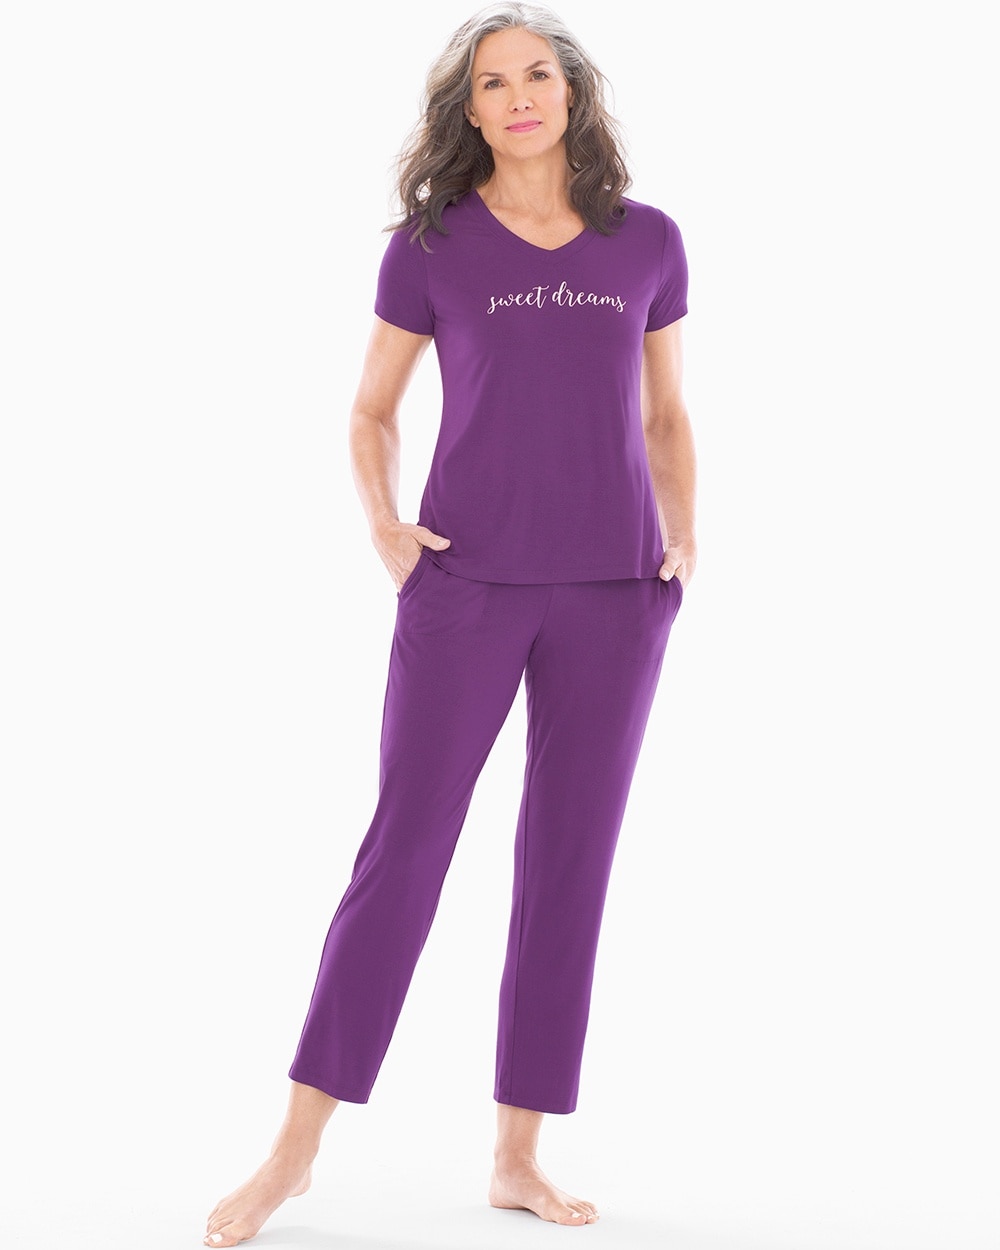 Cool Nights Ankle Length Pajama Set Imperial Purple